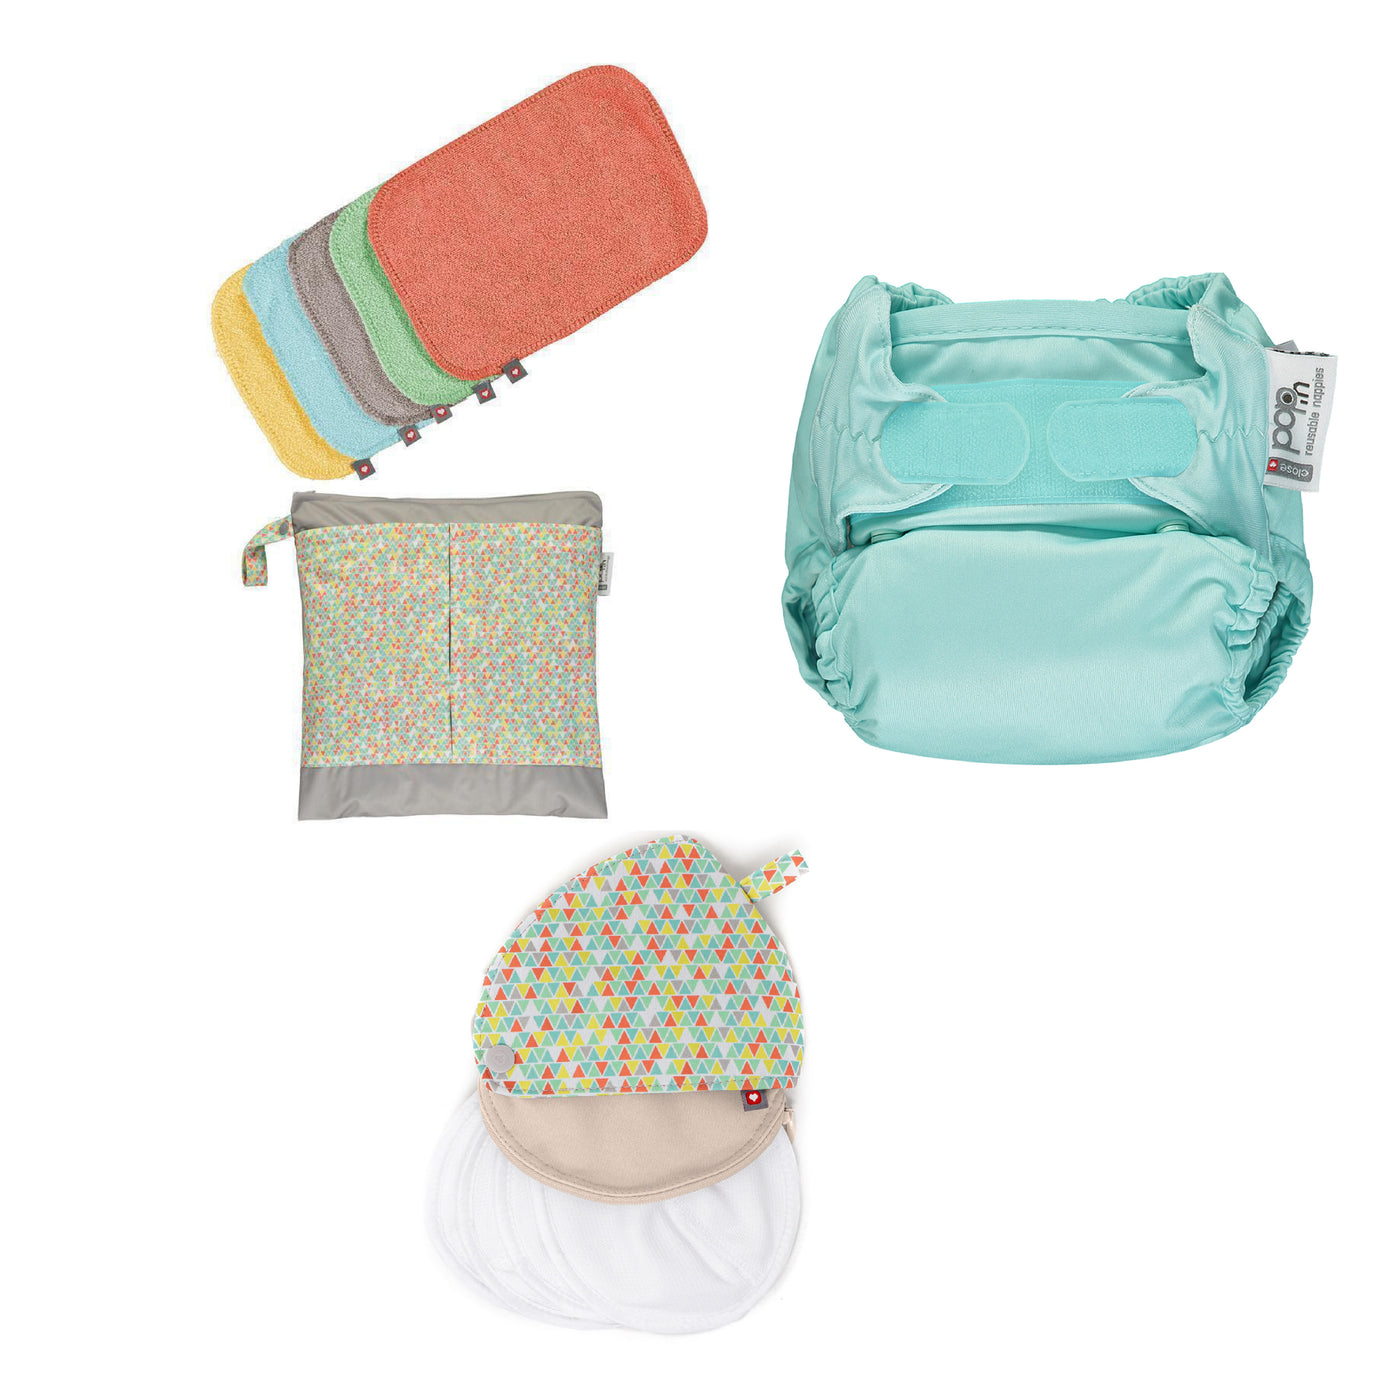 Reusable Starter Pack, Pastels - Nappy, Wipes, Breast pads